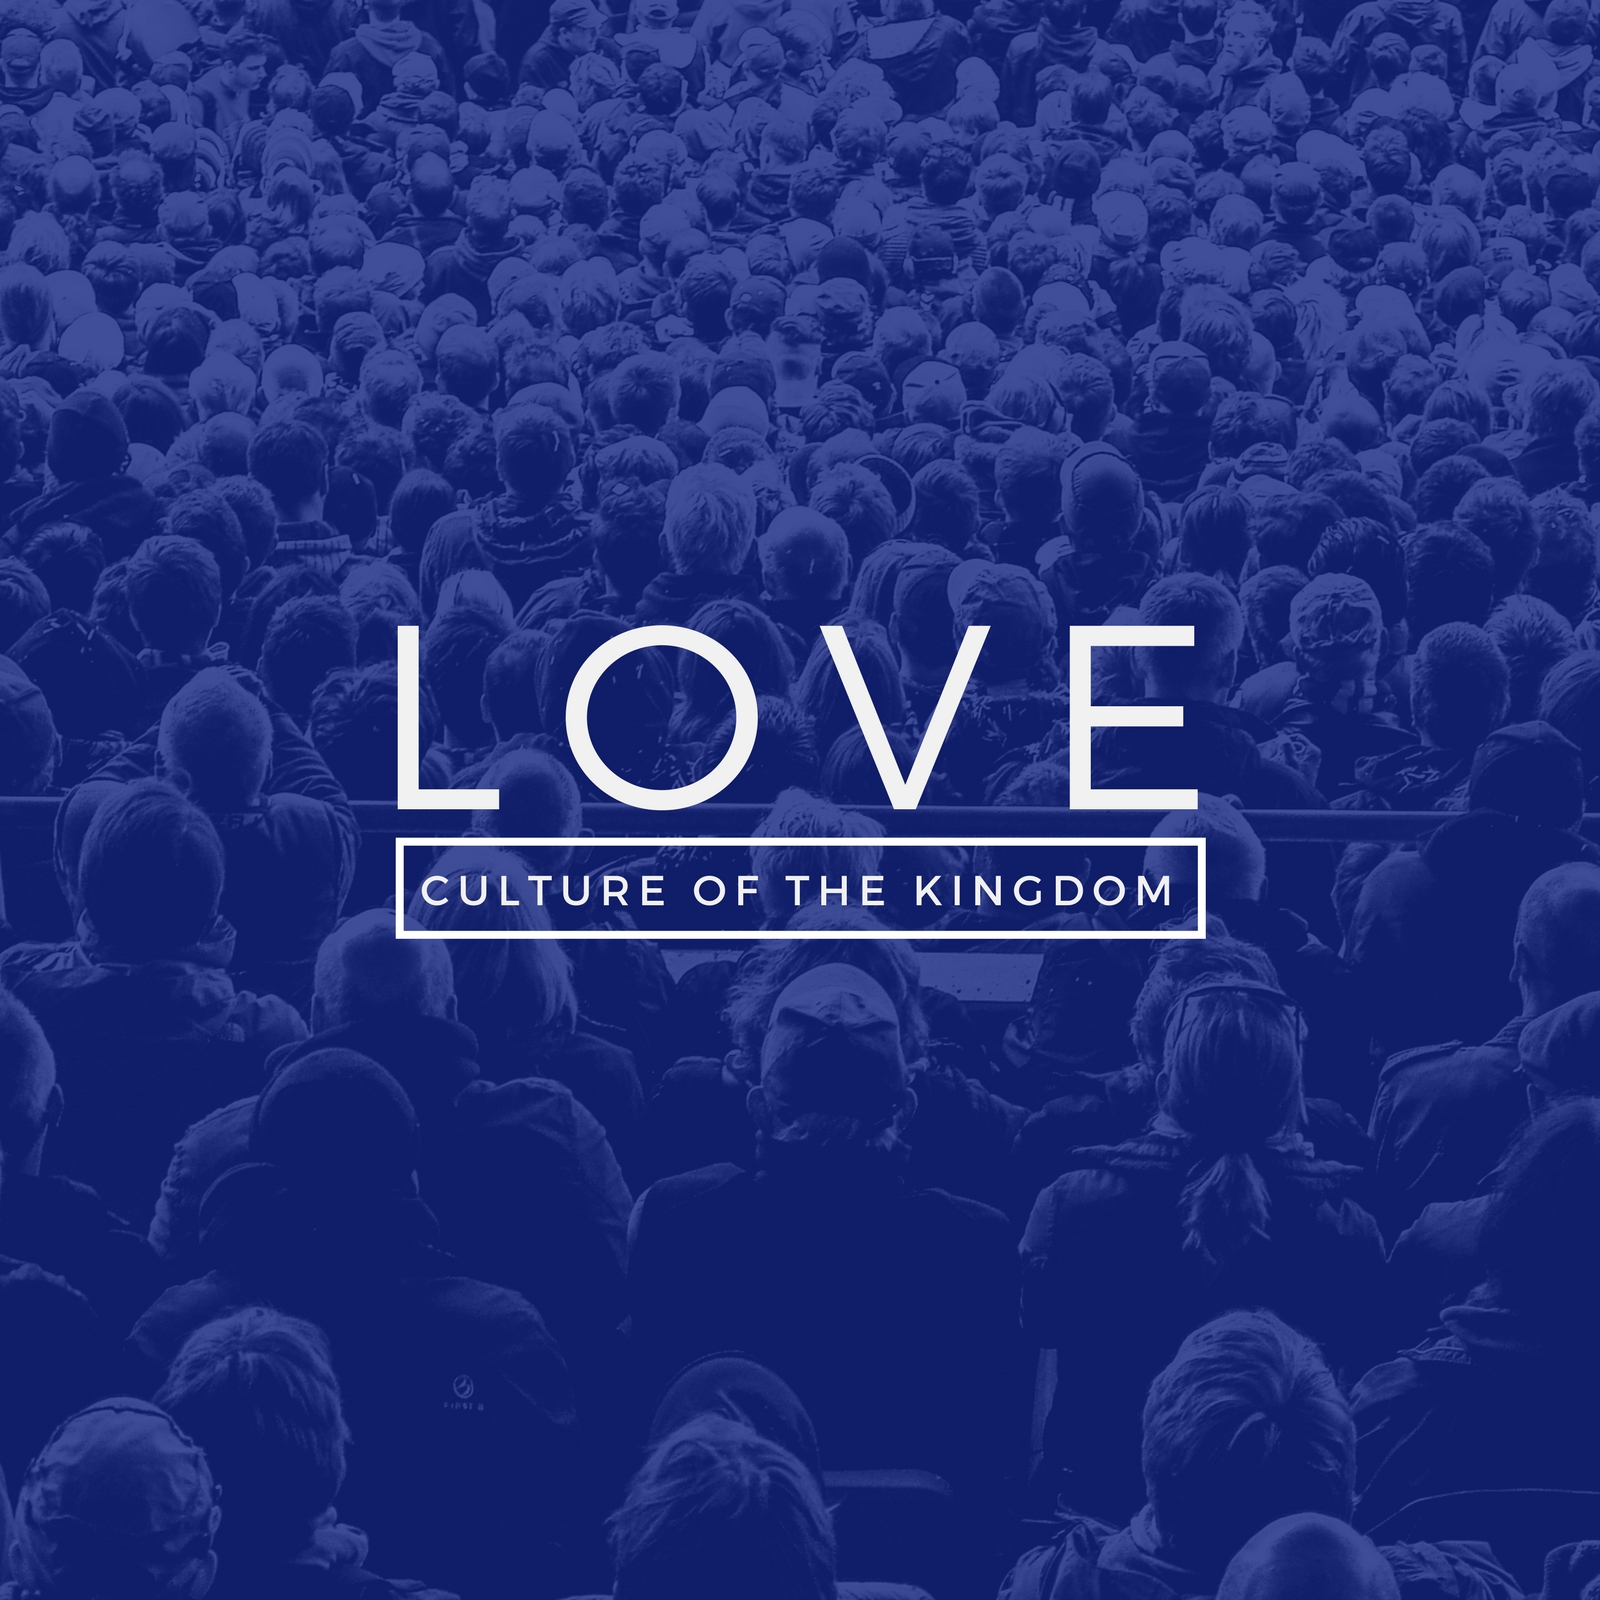 Love: Culture of the Kingdom